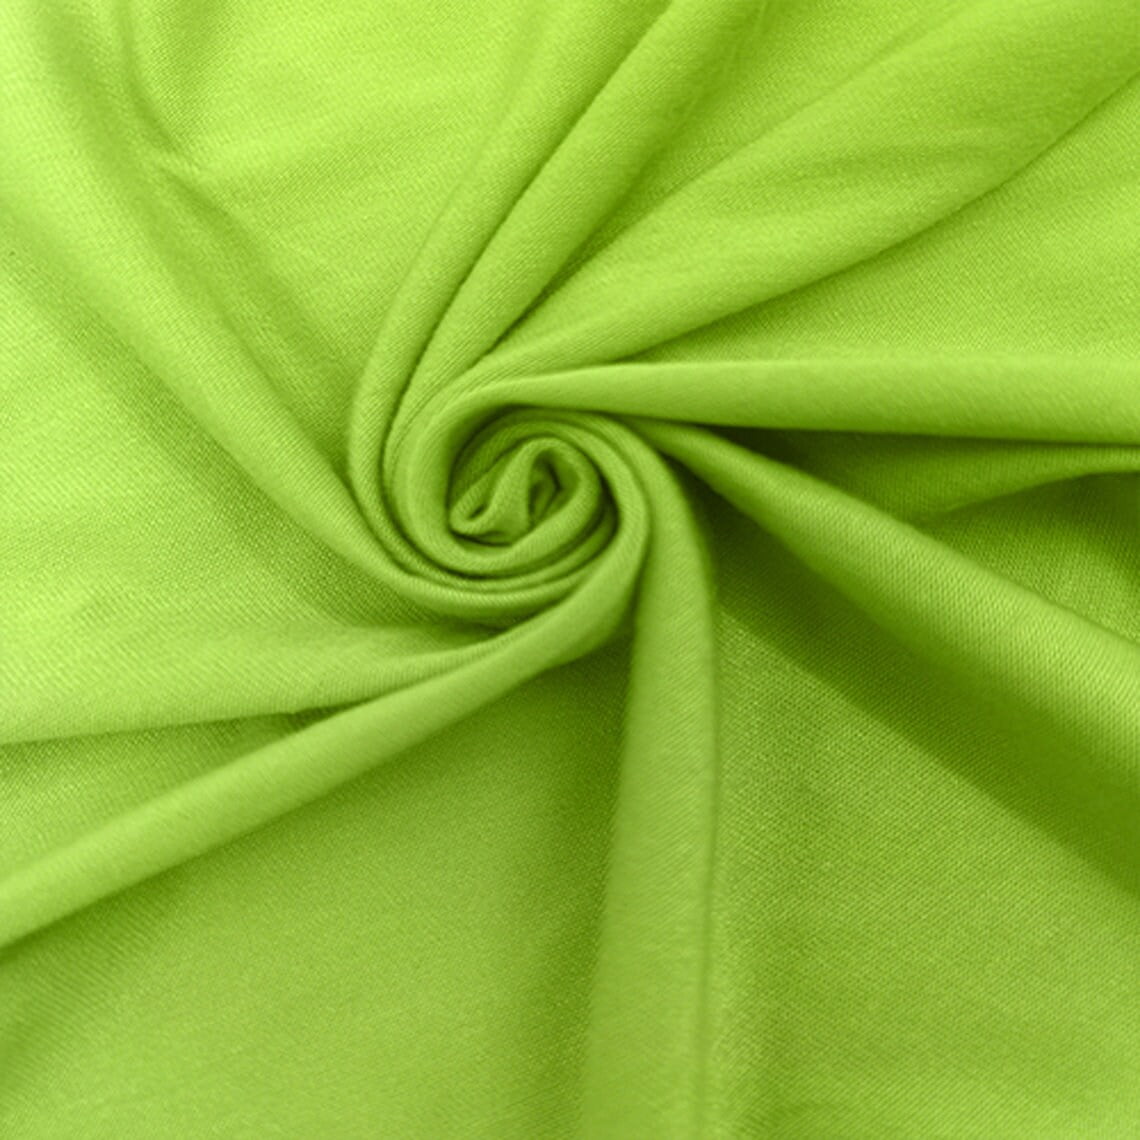 Green Mint LT Knit Fabric, 160GSM - Light Weight: Rayon Jersey Knit Fabric,  Causal Jersey Knit Fabric, Knitting Fabric by The Yard - 1 Yard